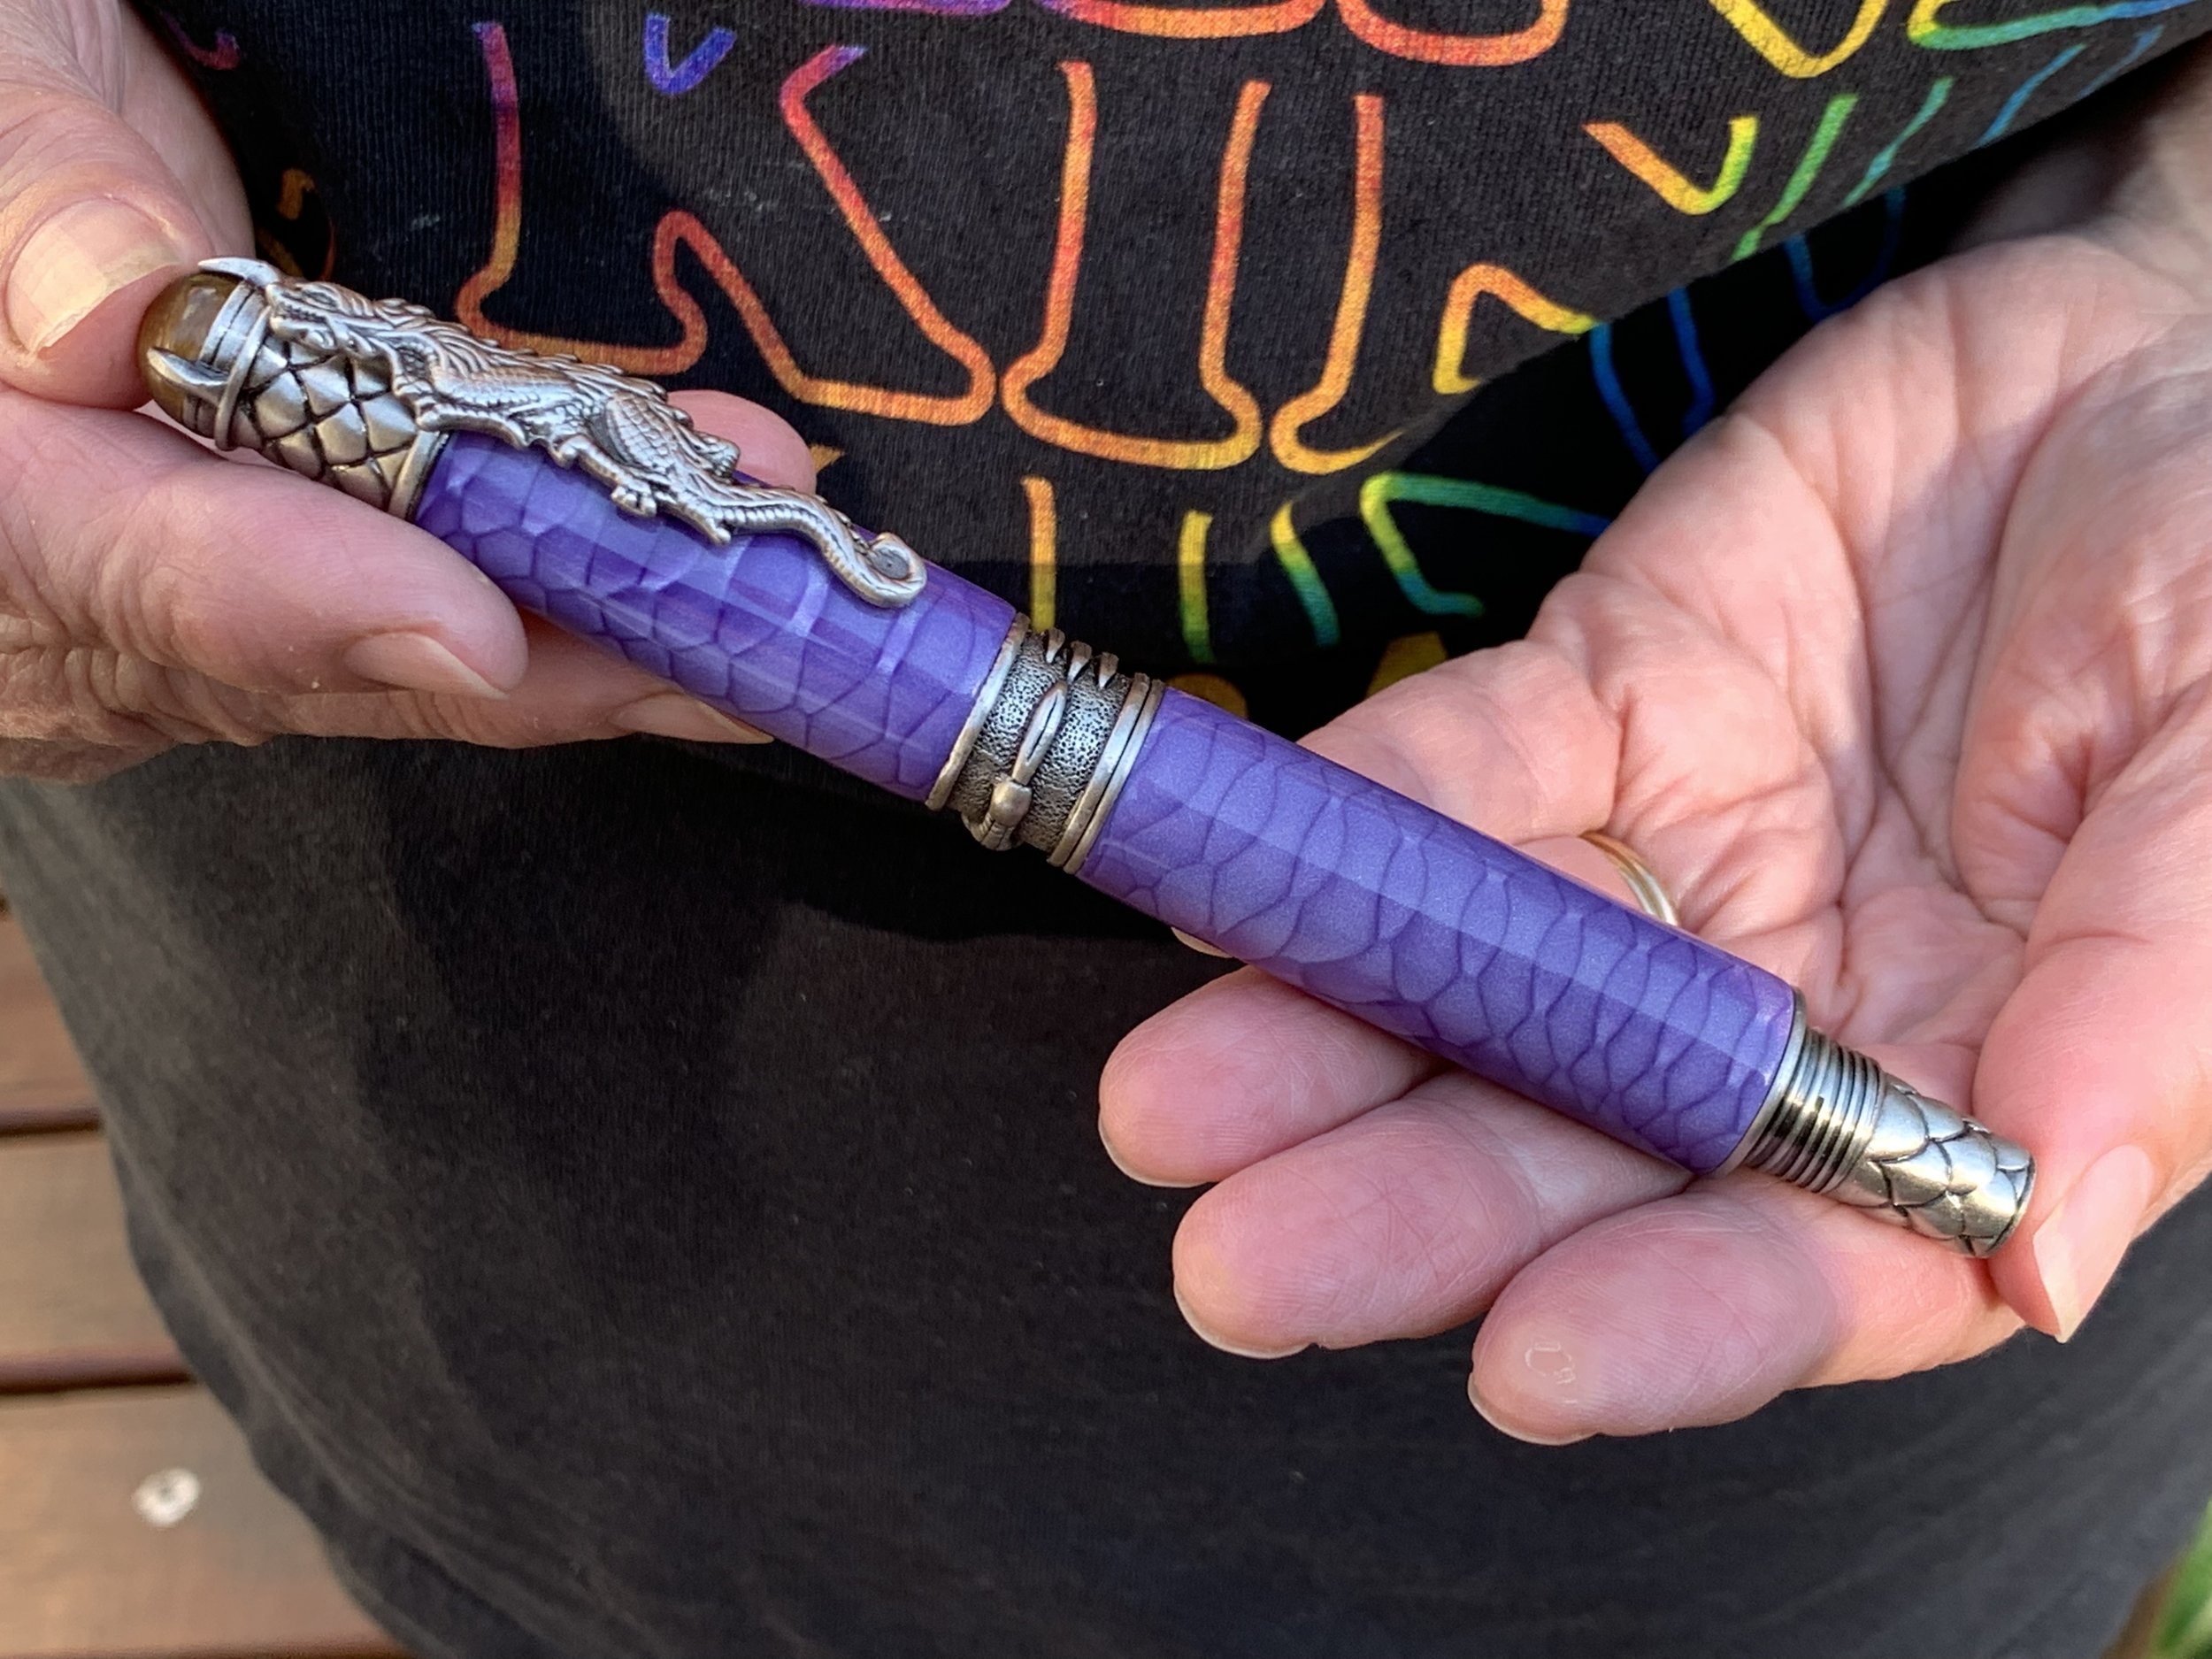 Dragon Rollerball - $60 - SOLD